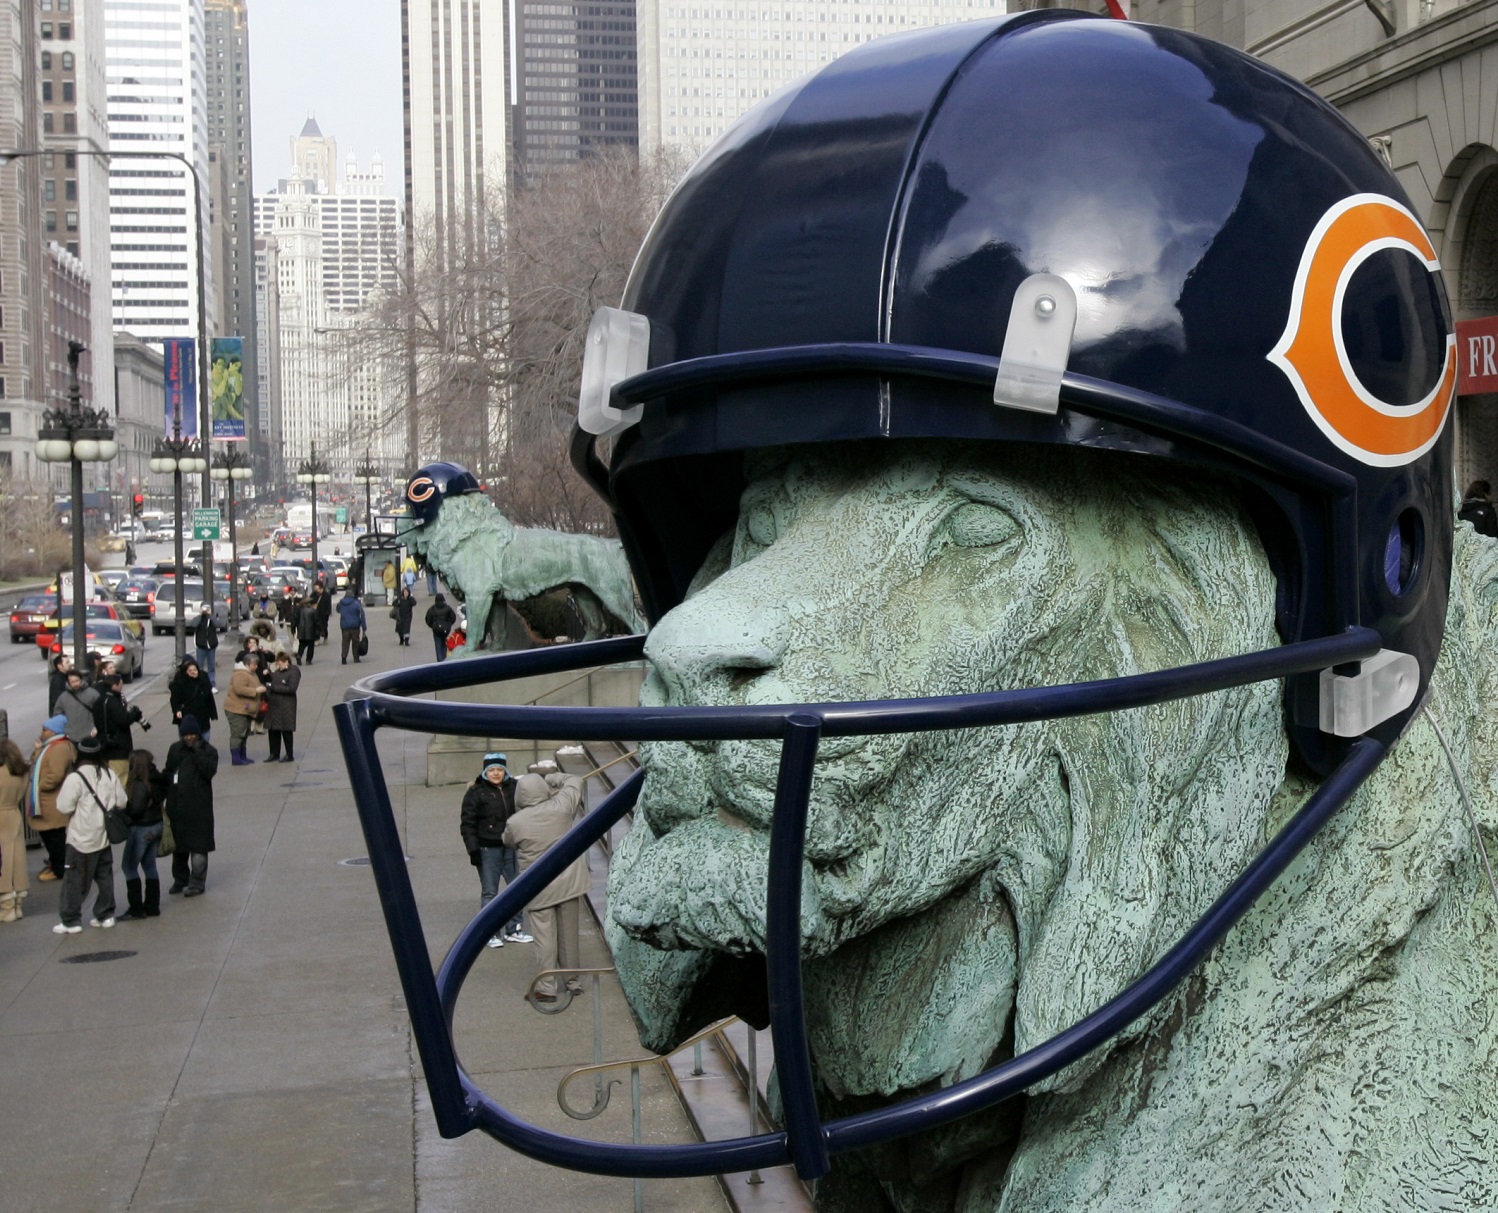 Visitors pose for photos with the bronze lions outside the Art Institute of Chicago, Thursday, Feb. 1, 2007. The lions were fitted with oversized helmets to support the Chicago Bears and Super Bowl Festivities. The Bears will play the Indianapolis Colts in Super Bowl XLI on Sunday, Feb. 4th.   (AP Photo/Charles Rex Arbogast)